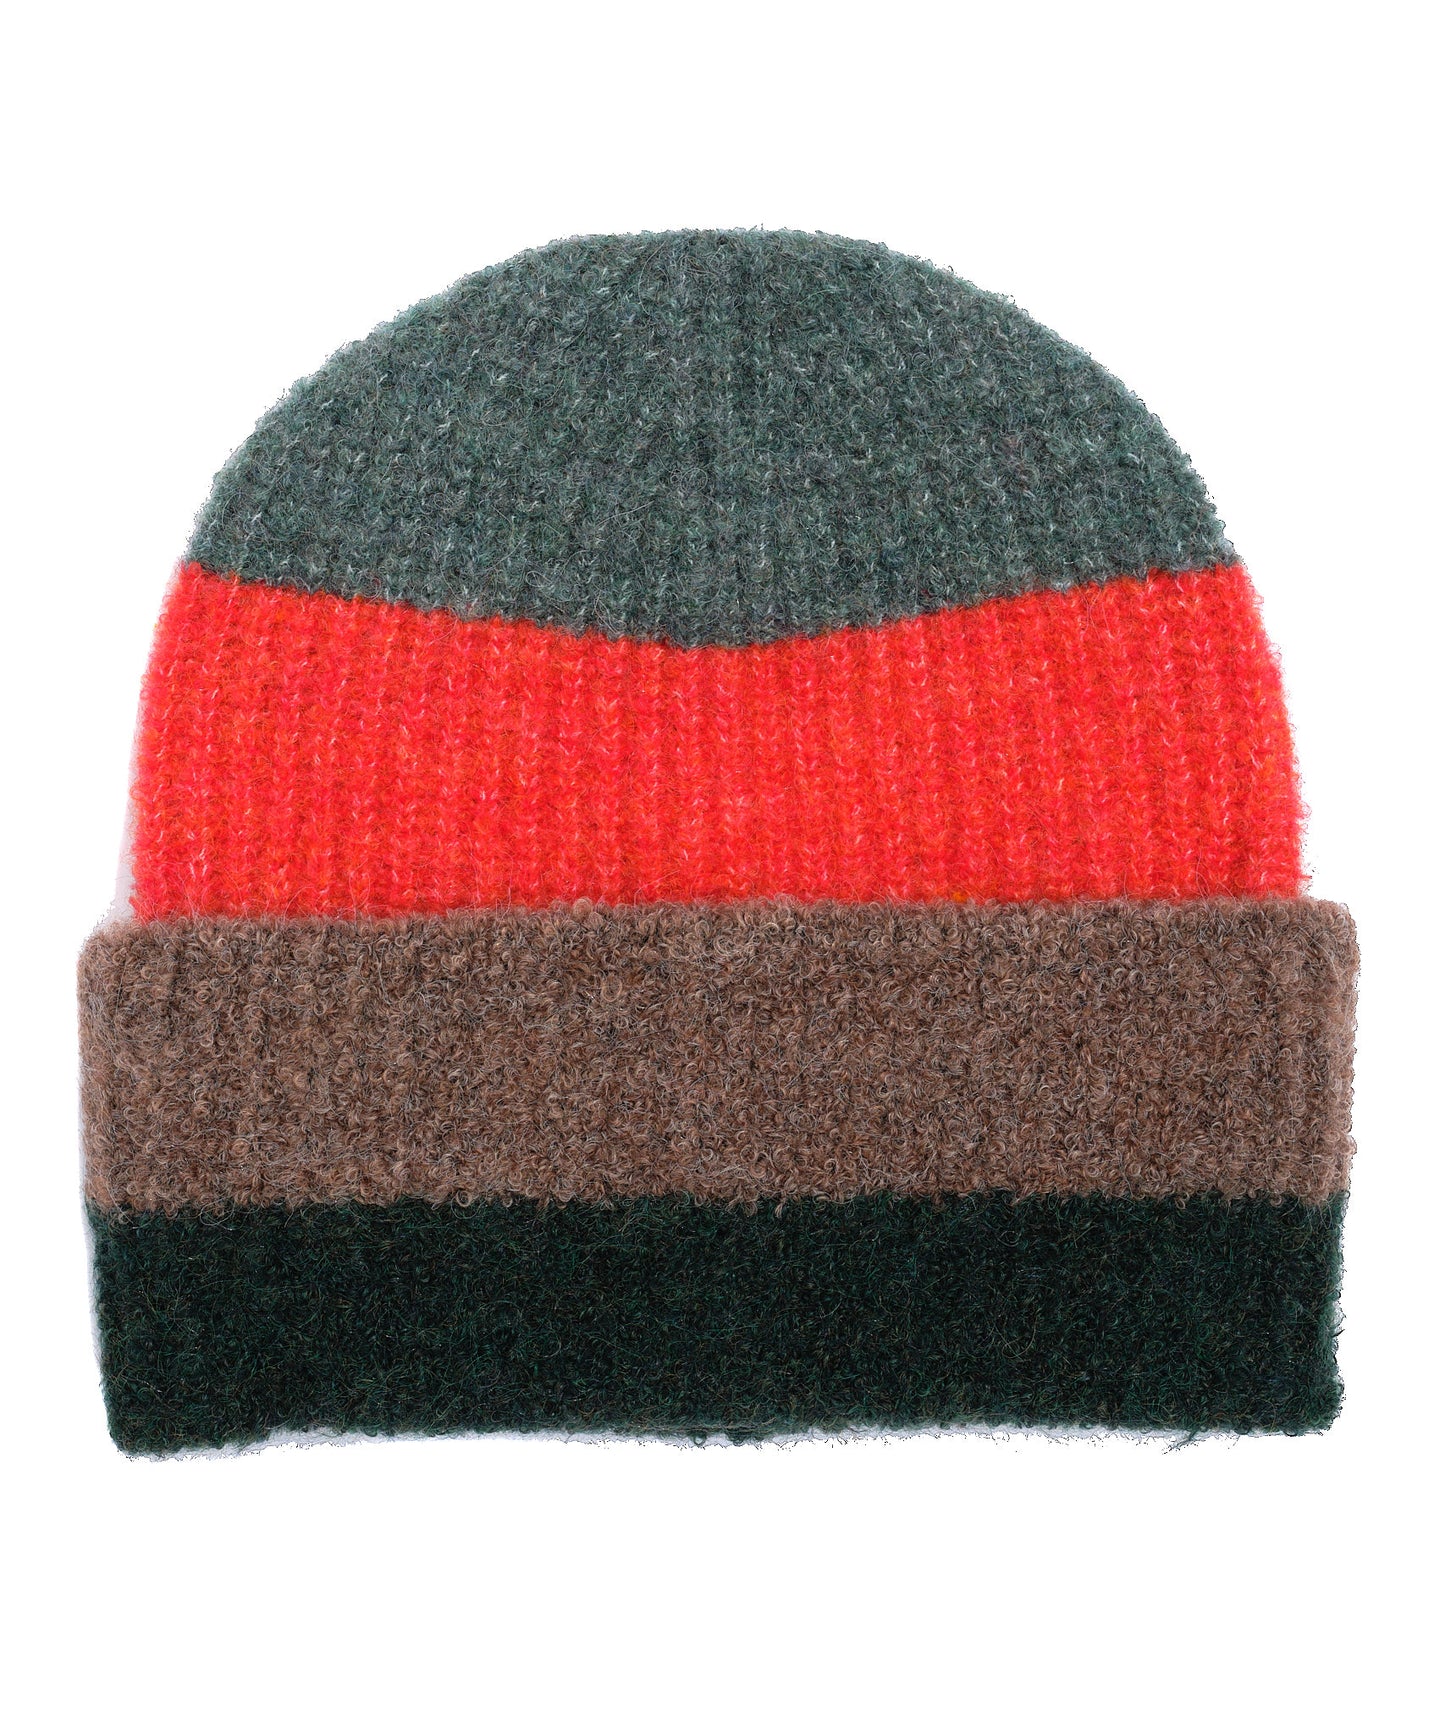 Plush Colorblock Beanie in color Trekking Green